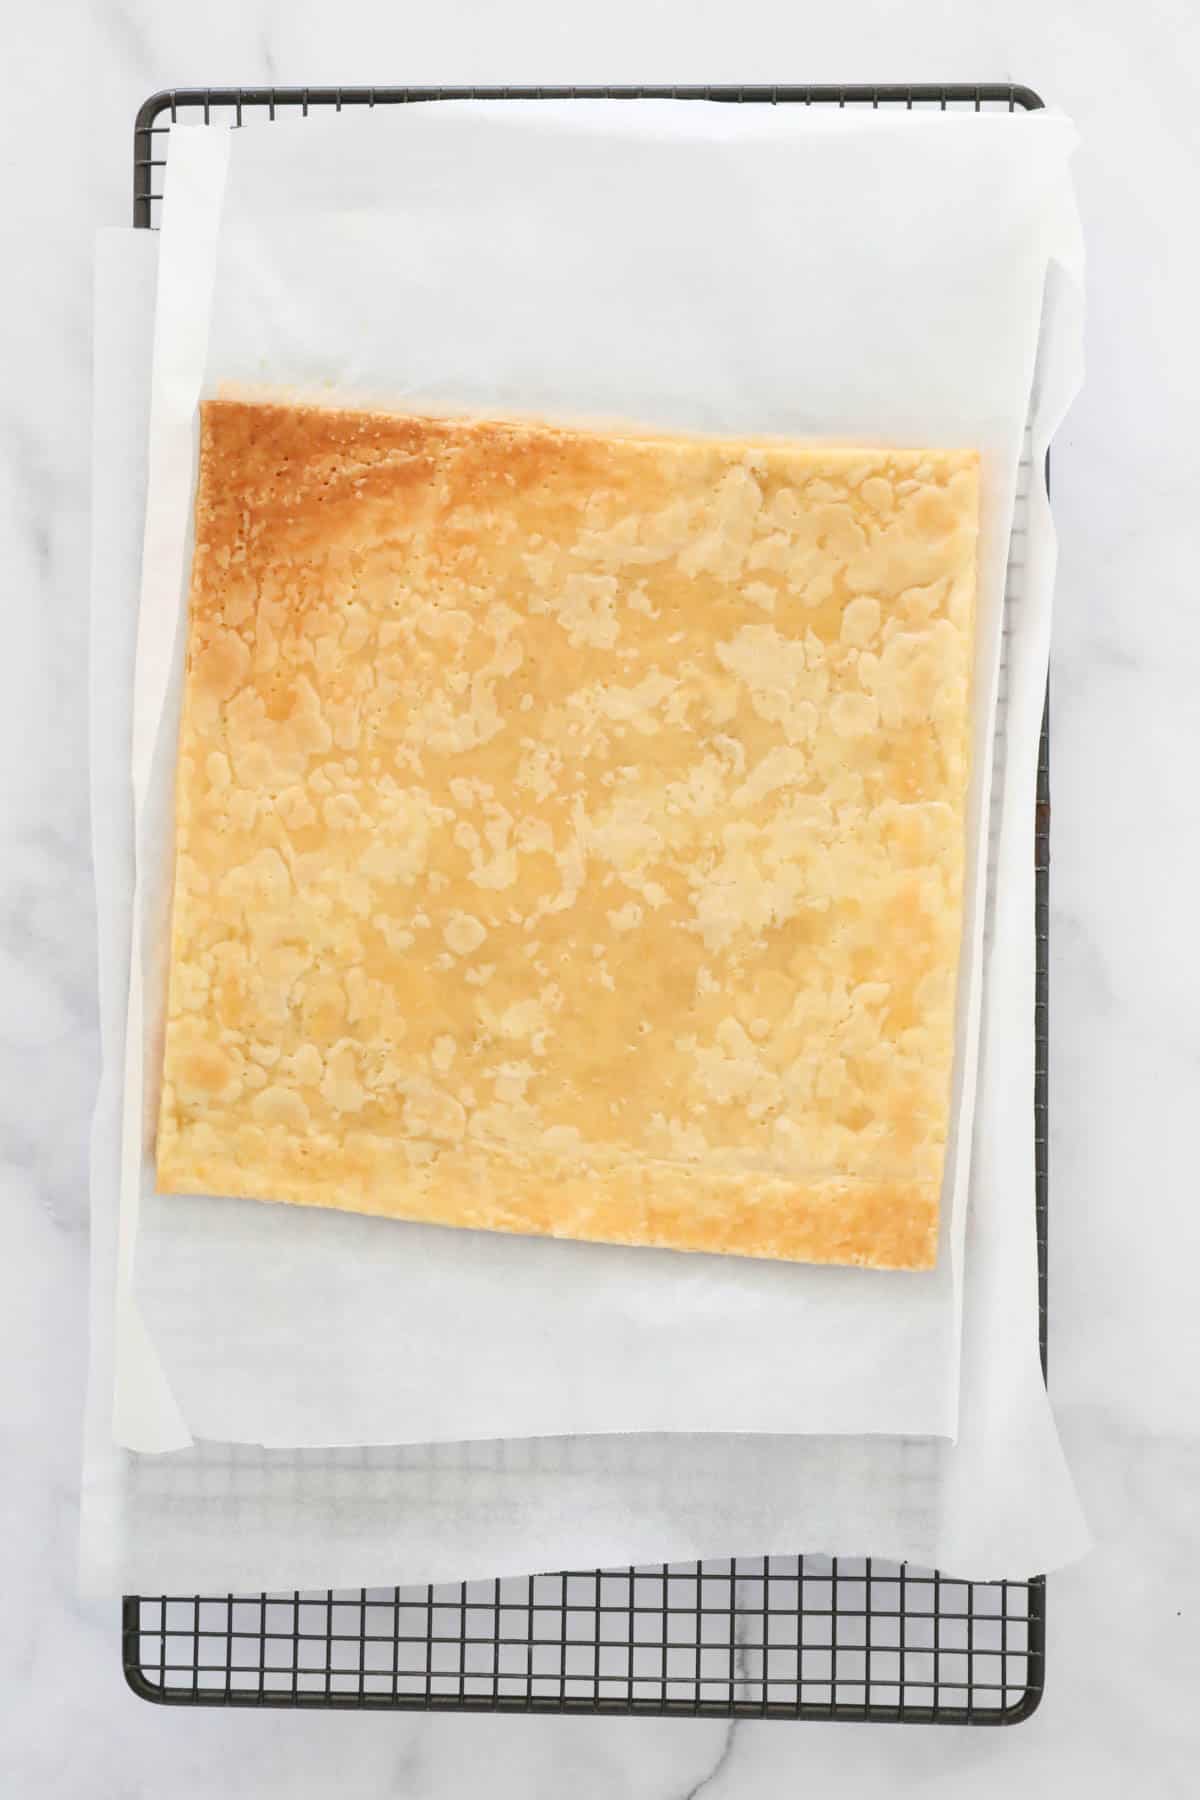 A sheet of baked puff pastry on baking paper.